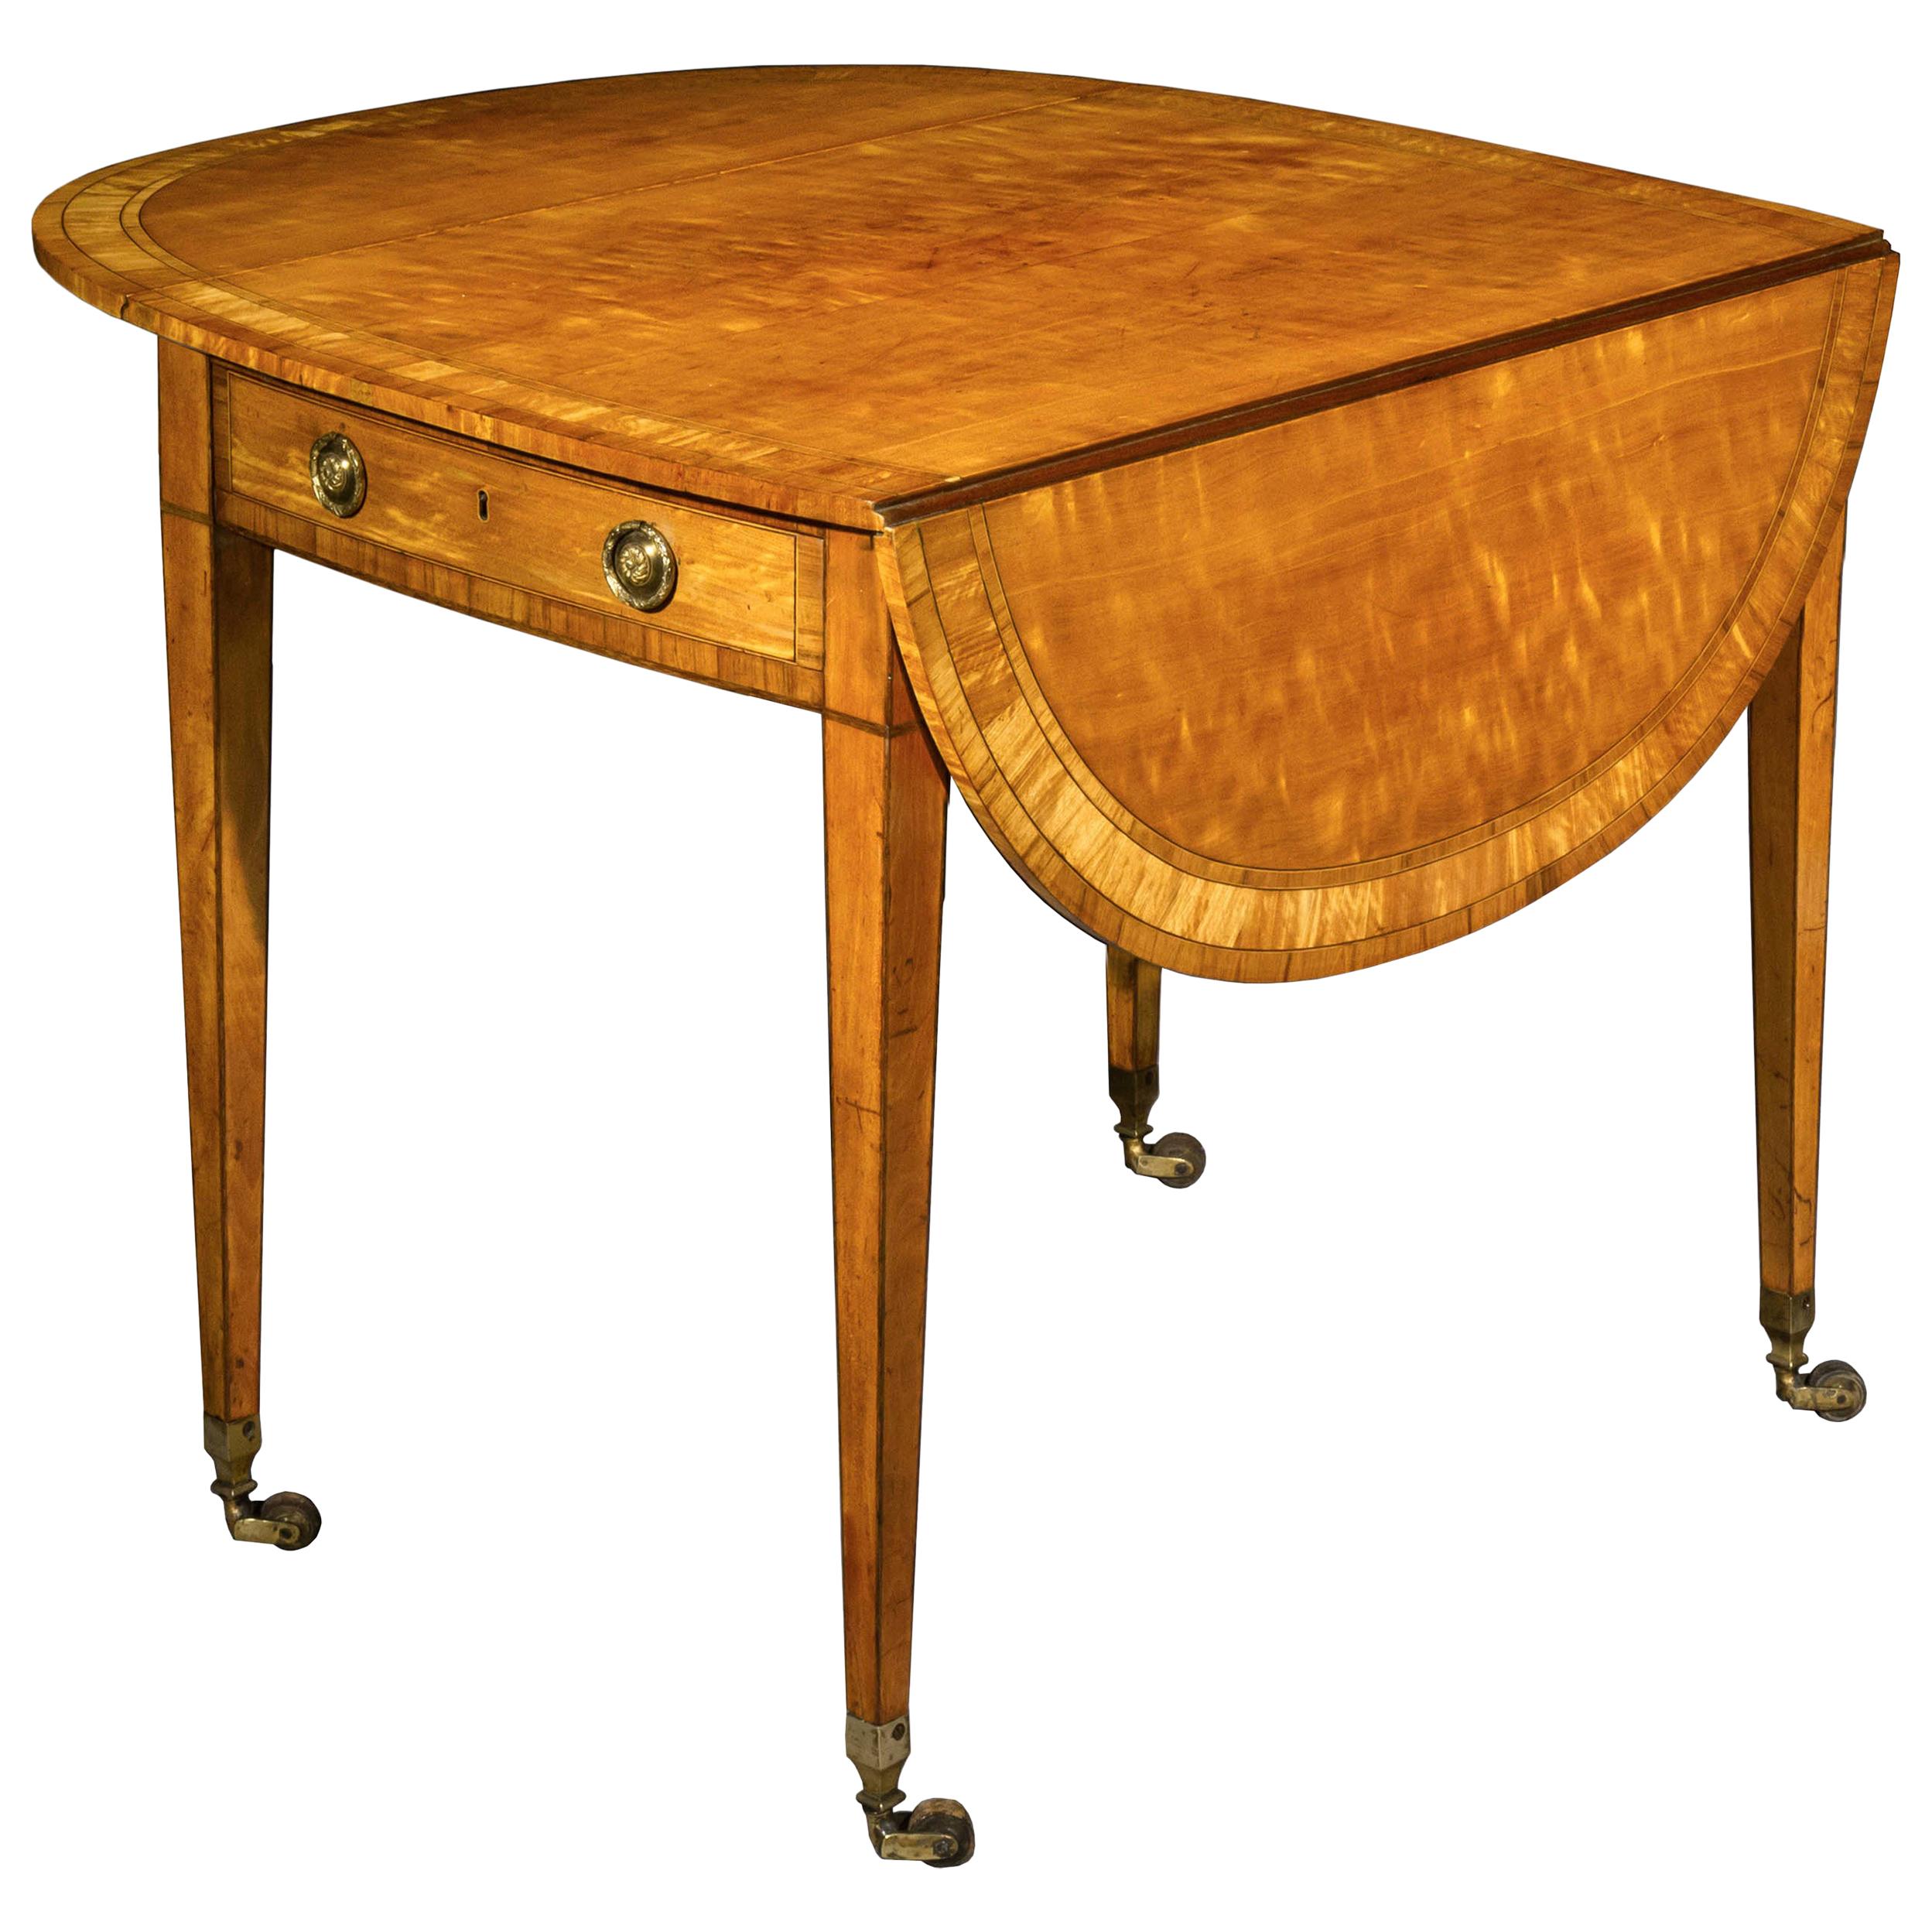 18th Century Satinwood Oval Pembroke Table